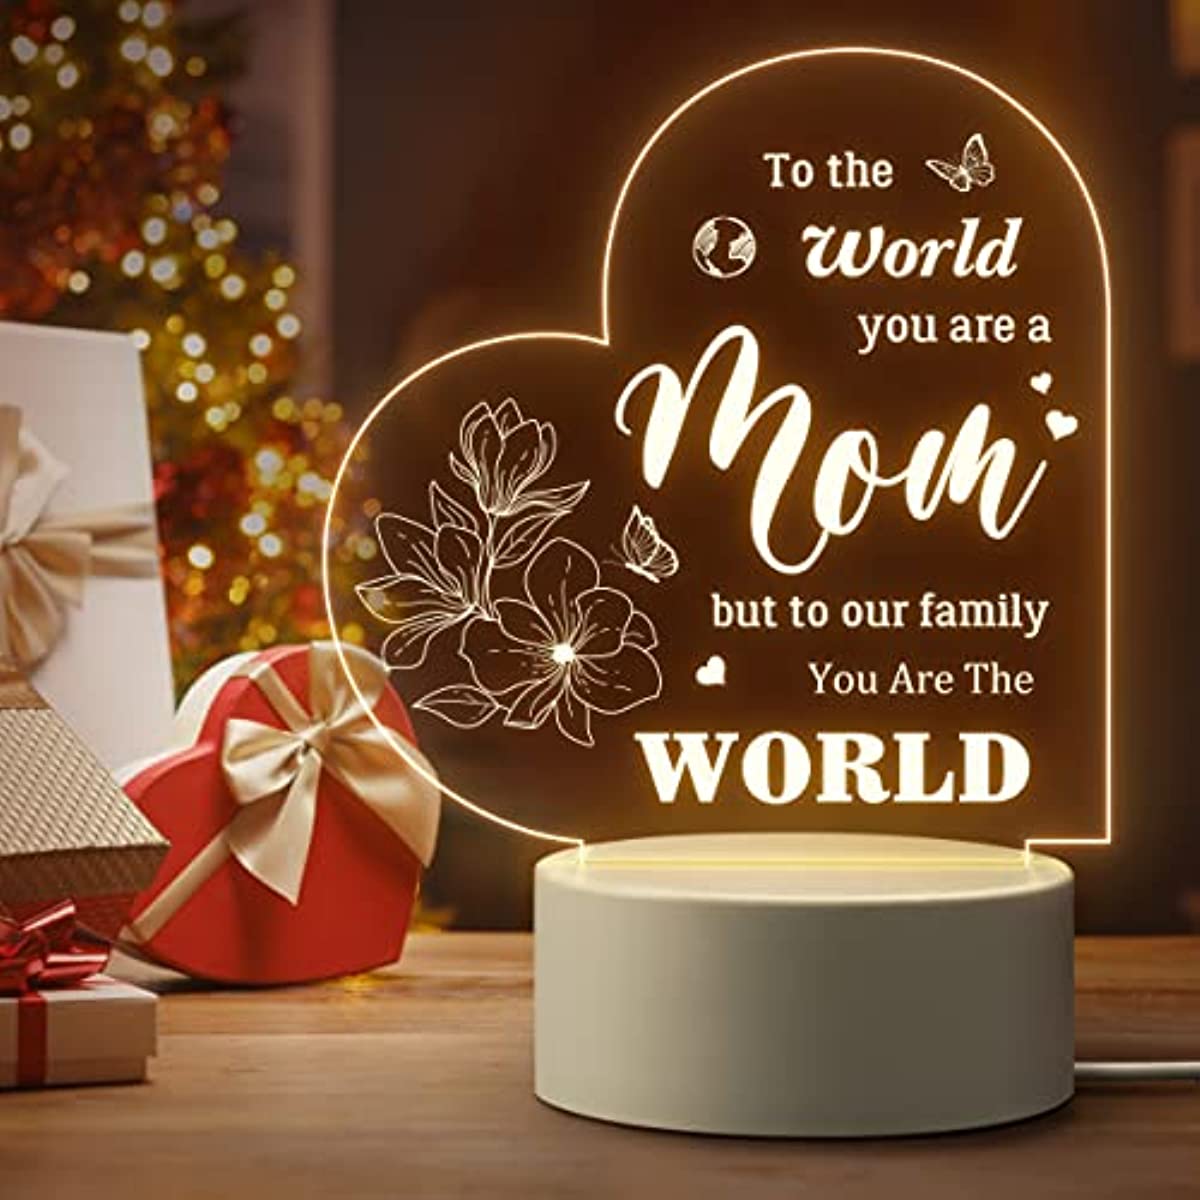 Christmas Gift Ideas For Mom From Daughter, Son, Christmas